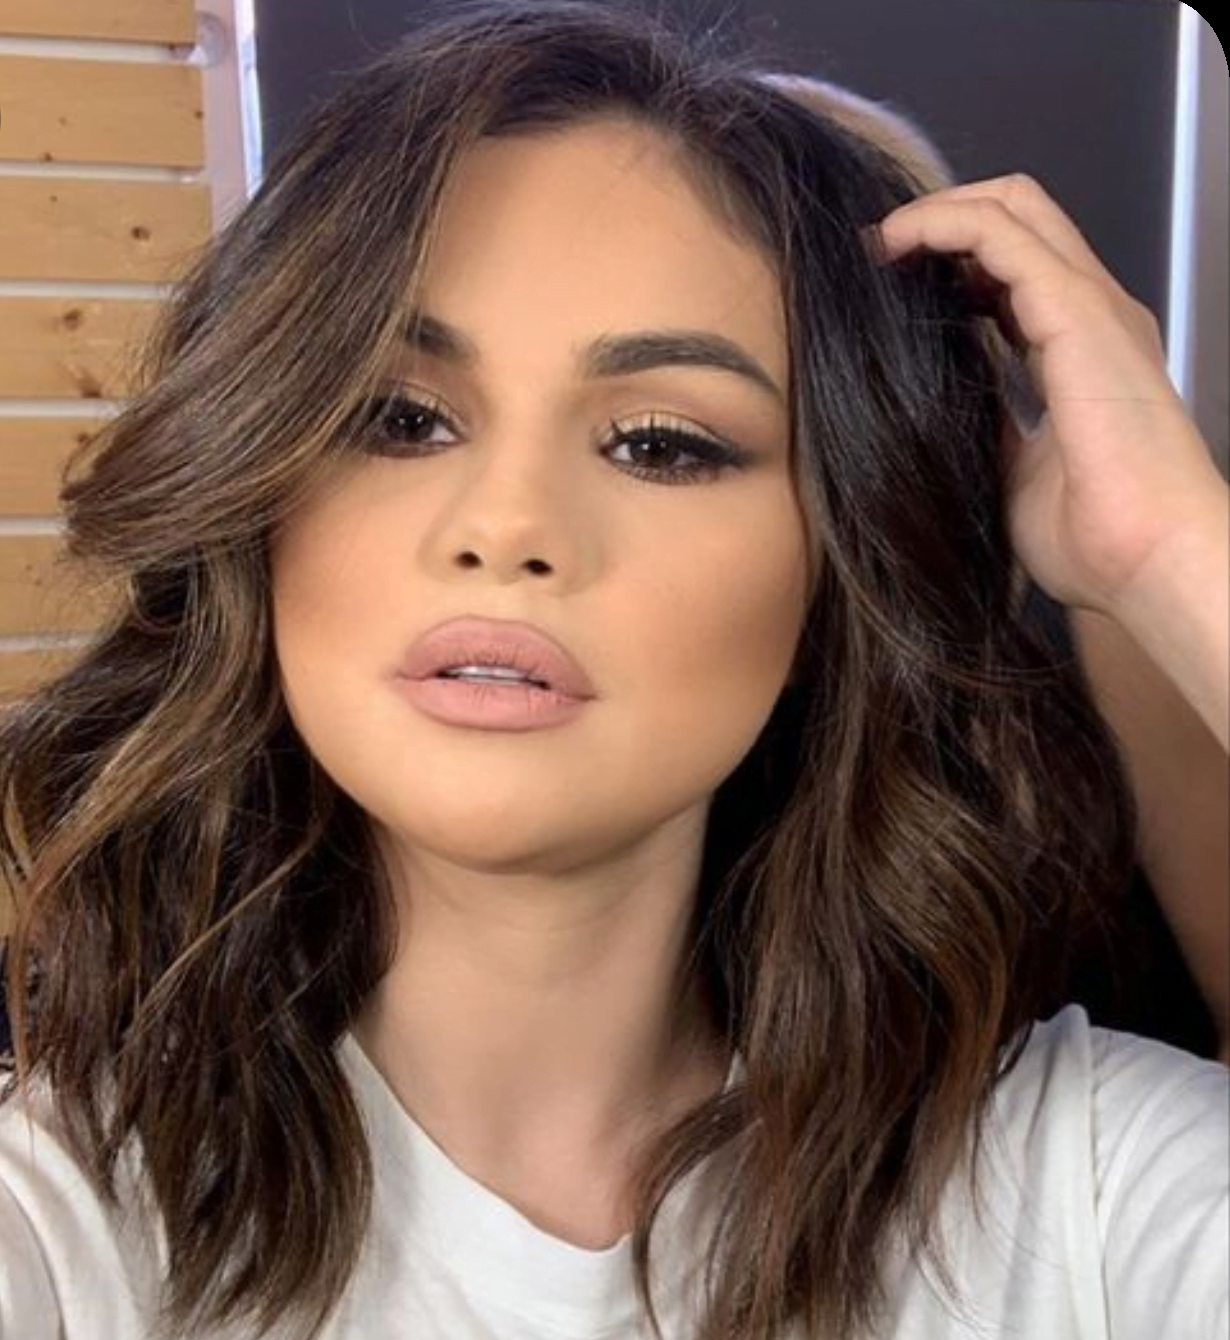 Those lips on Selena Gomez are meant for cocksucking